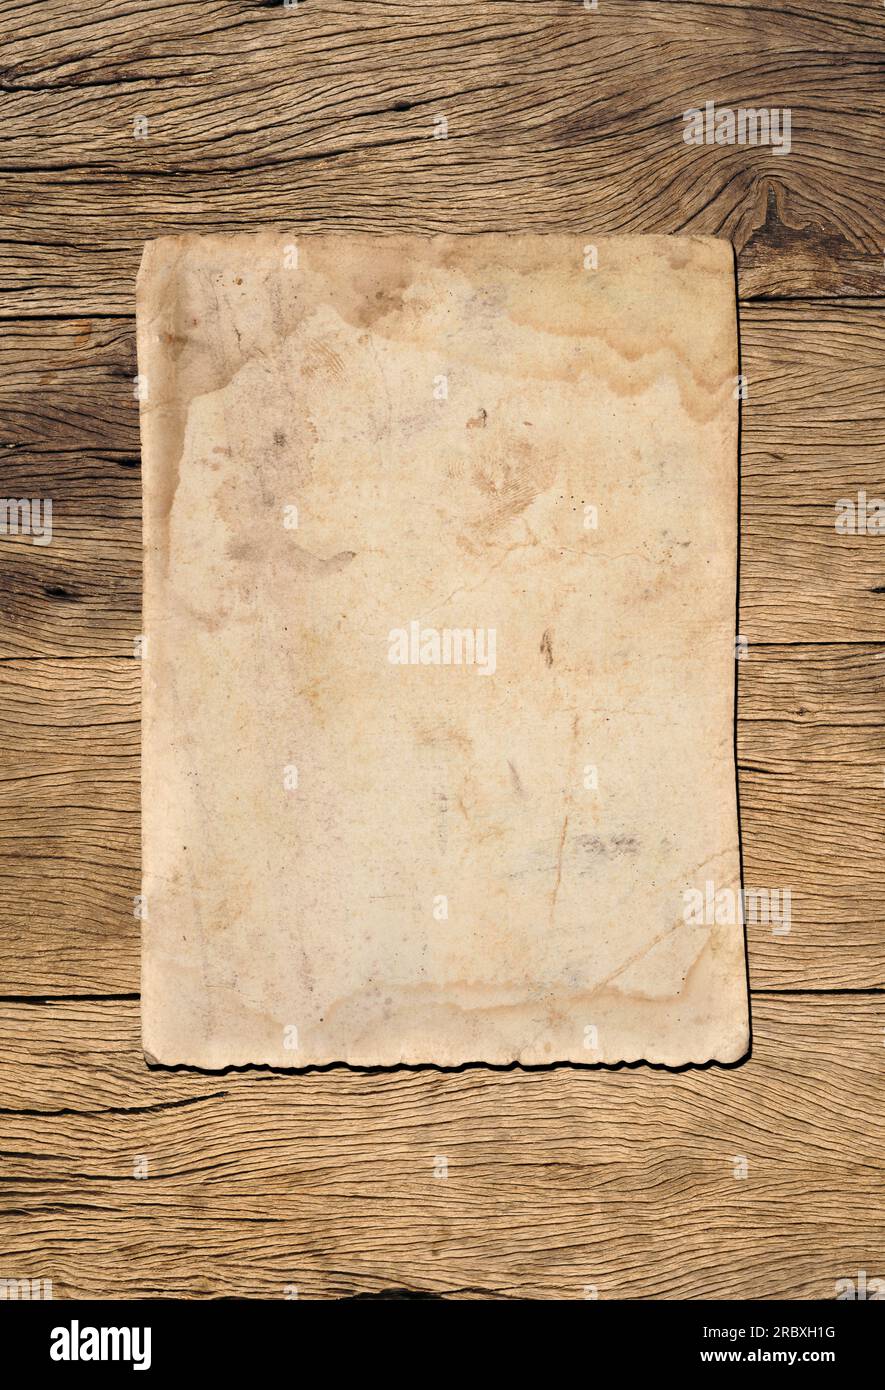 Free: Old paper texture background 